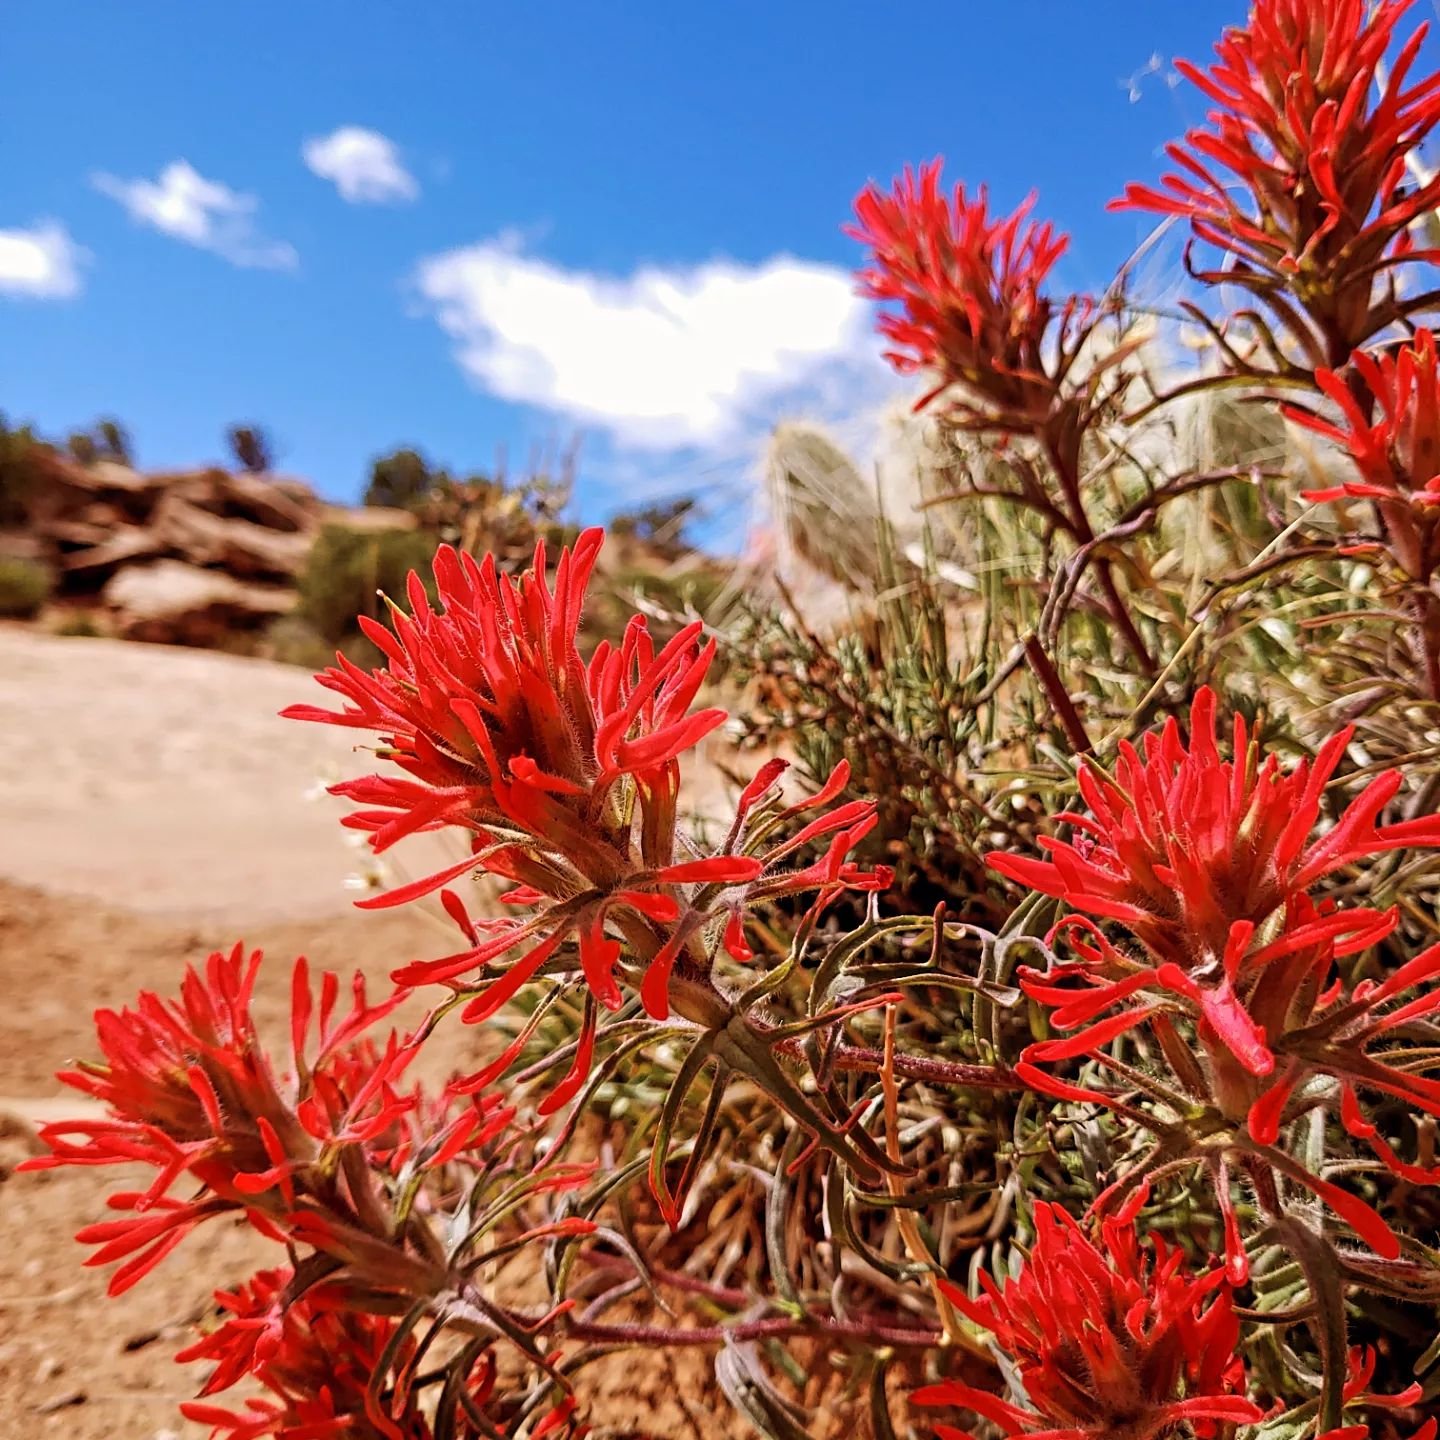 If you want to get lost in depth of field, this is the spot&hearts; 
Pictured here are some glorious Indian Paintbrush, with an immense ancient ocean bed below. It's like the Grand Canyon, but not. 

That white cap below is holdin' it all together. M